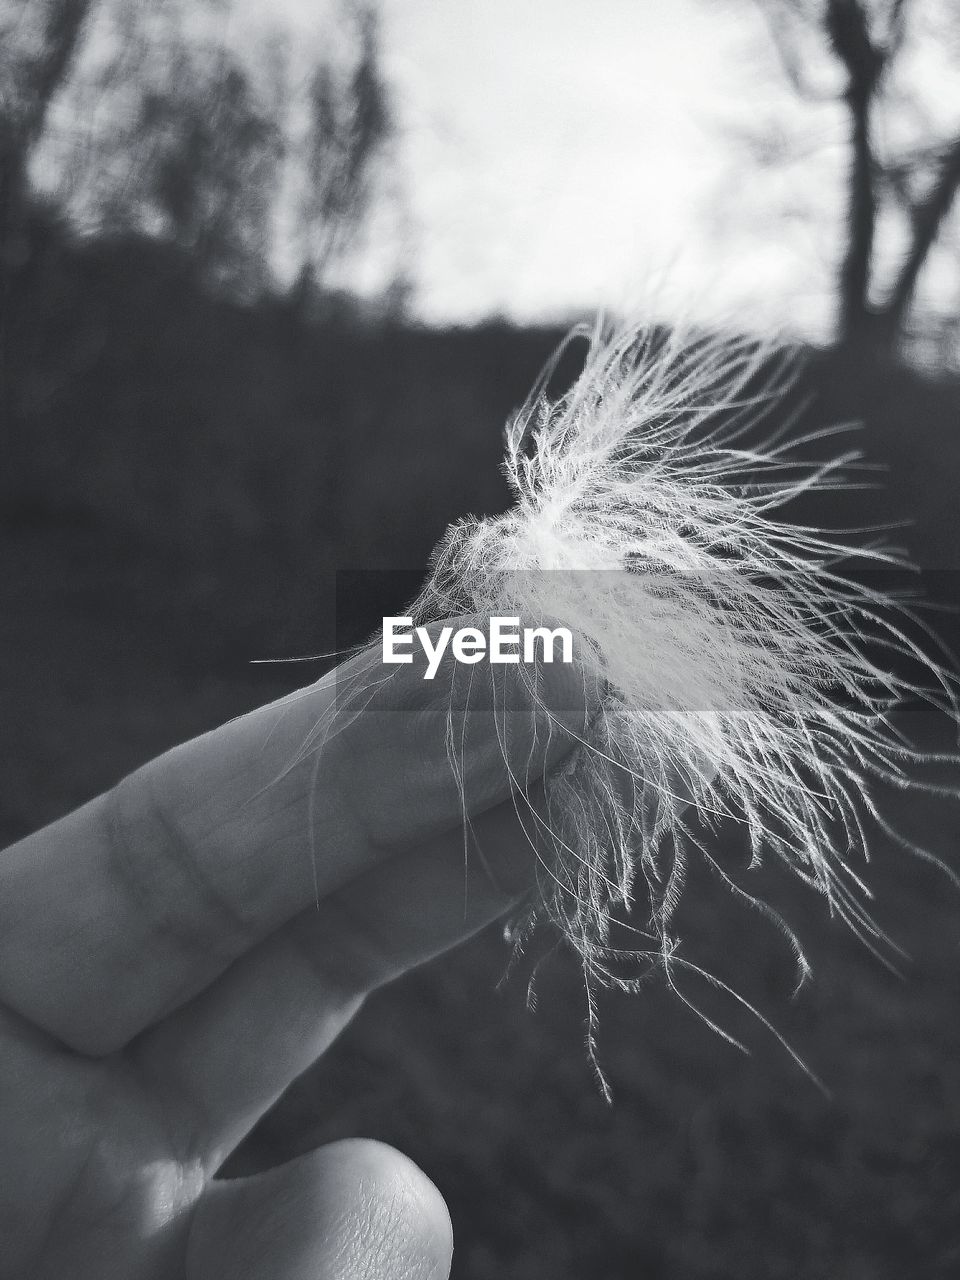 CLOSE-UP OF PERSON HAND HOLDING DANDELION